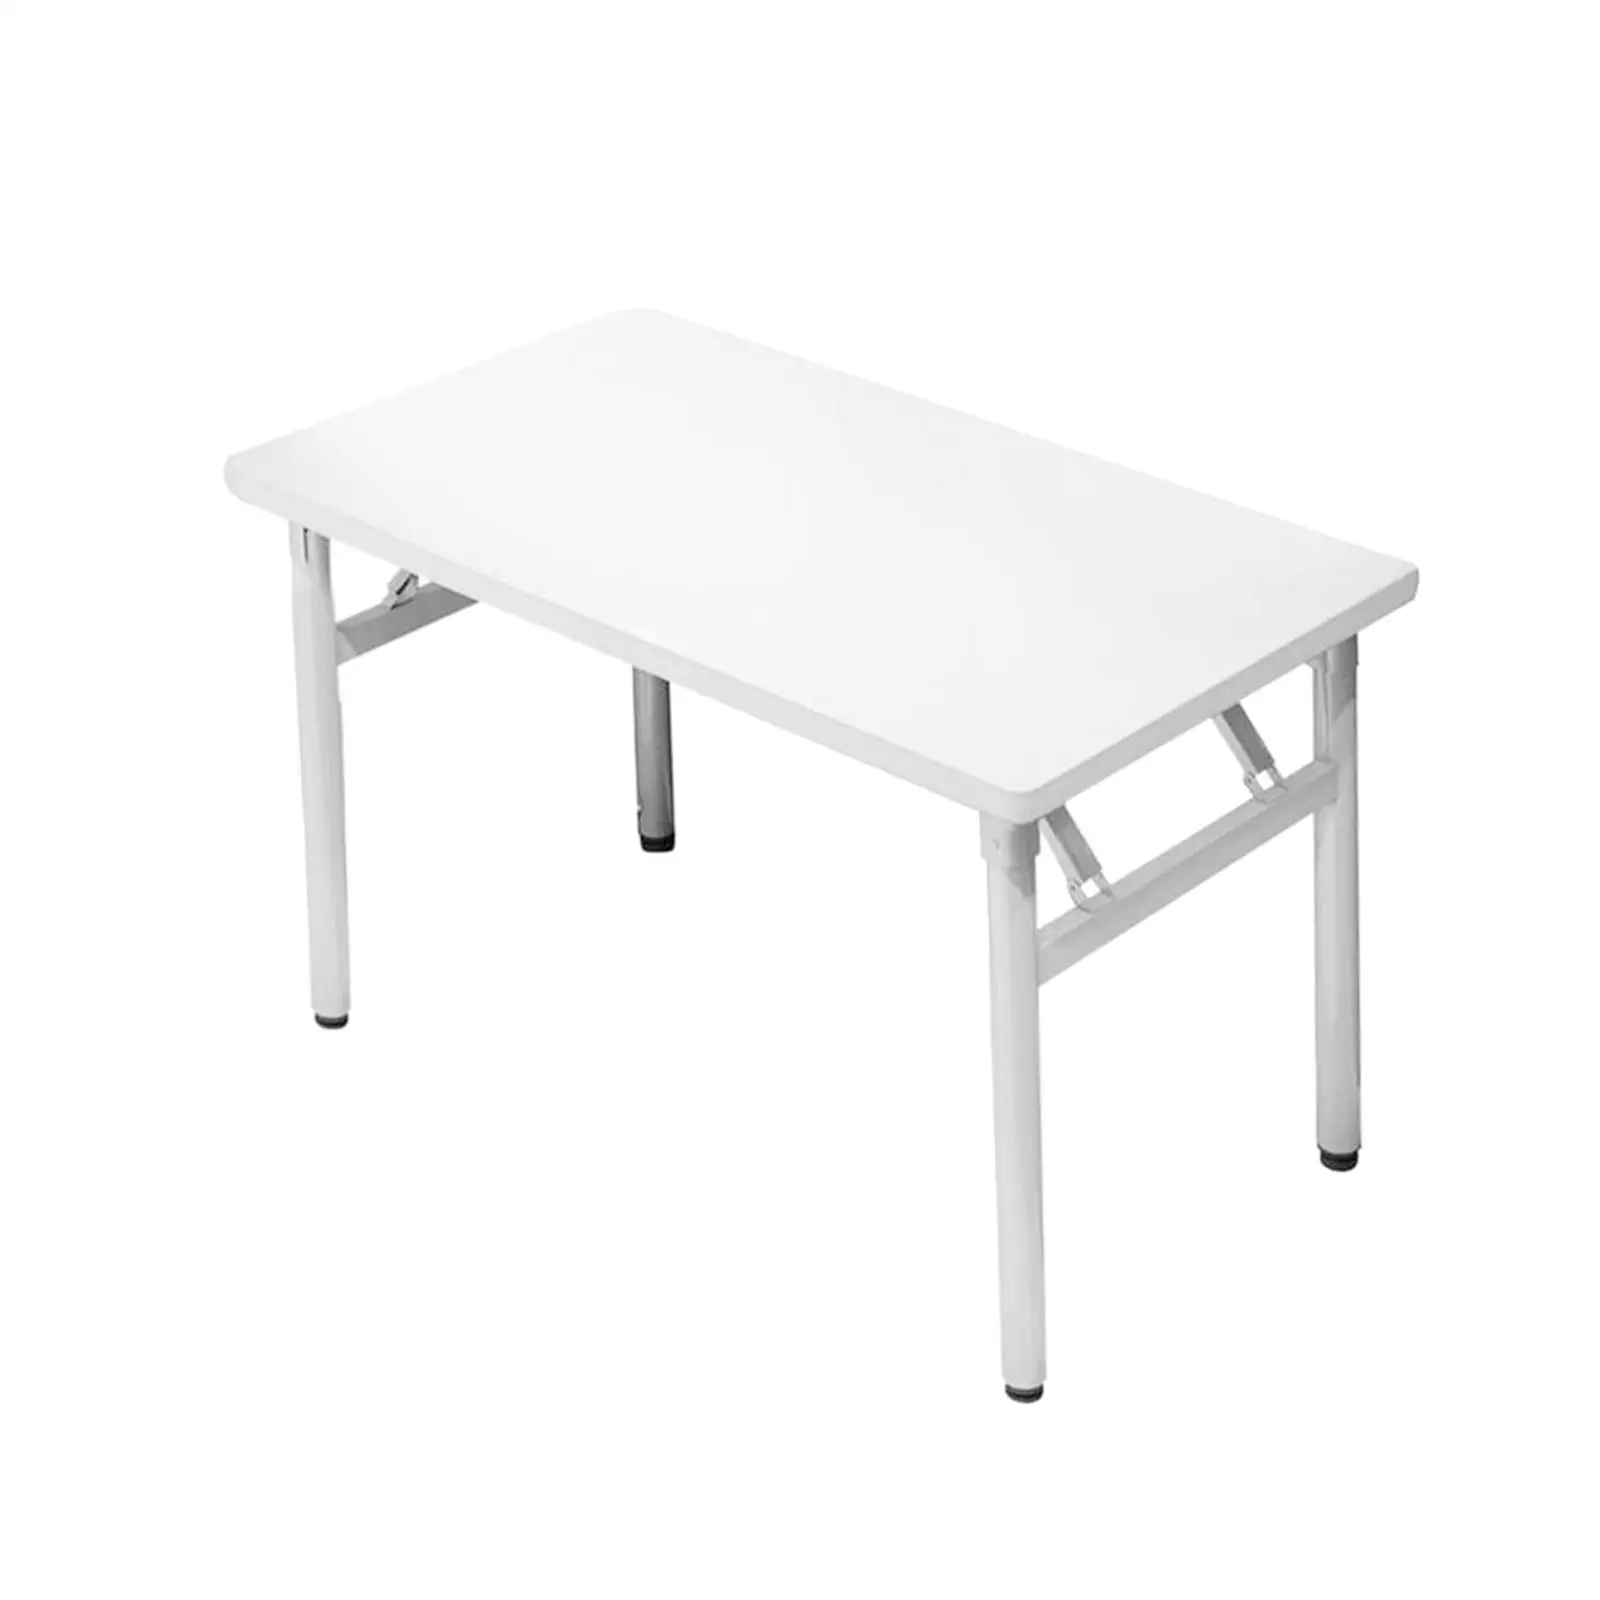 Heavy Duty Folding Table Work Station Laptop Tea Coffee Picnic Table Desk Camping Table Computer Table for Party Indoor RV BBQ